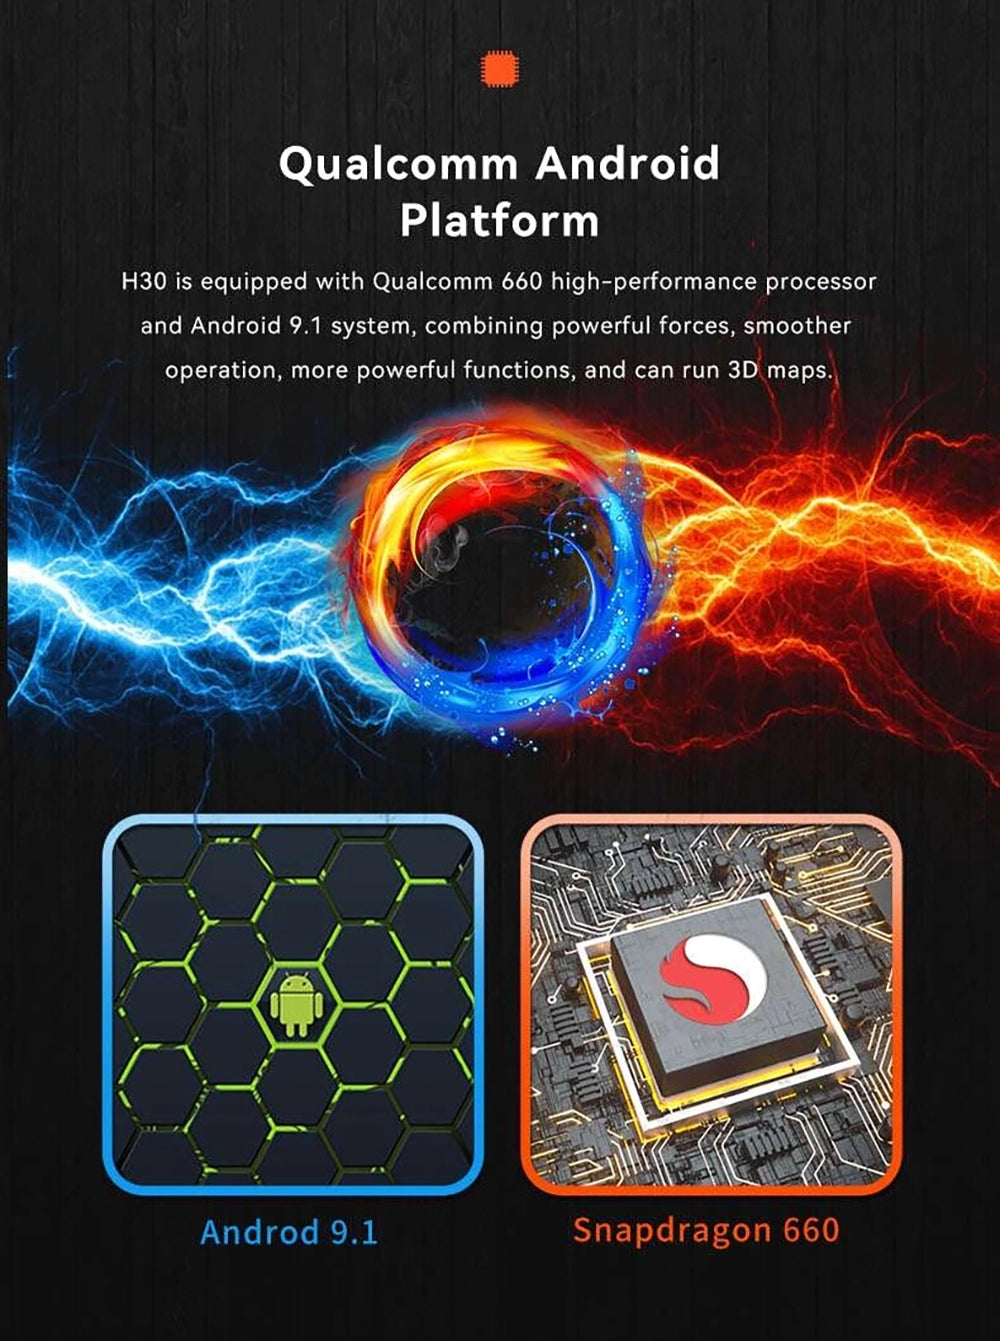 Skydroid H30 Remote Controller, Qualcomm Android Platform H30 is equipped with Qualcomm 660 high-performance processor and Android 9.1